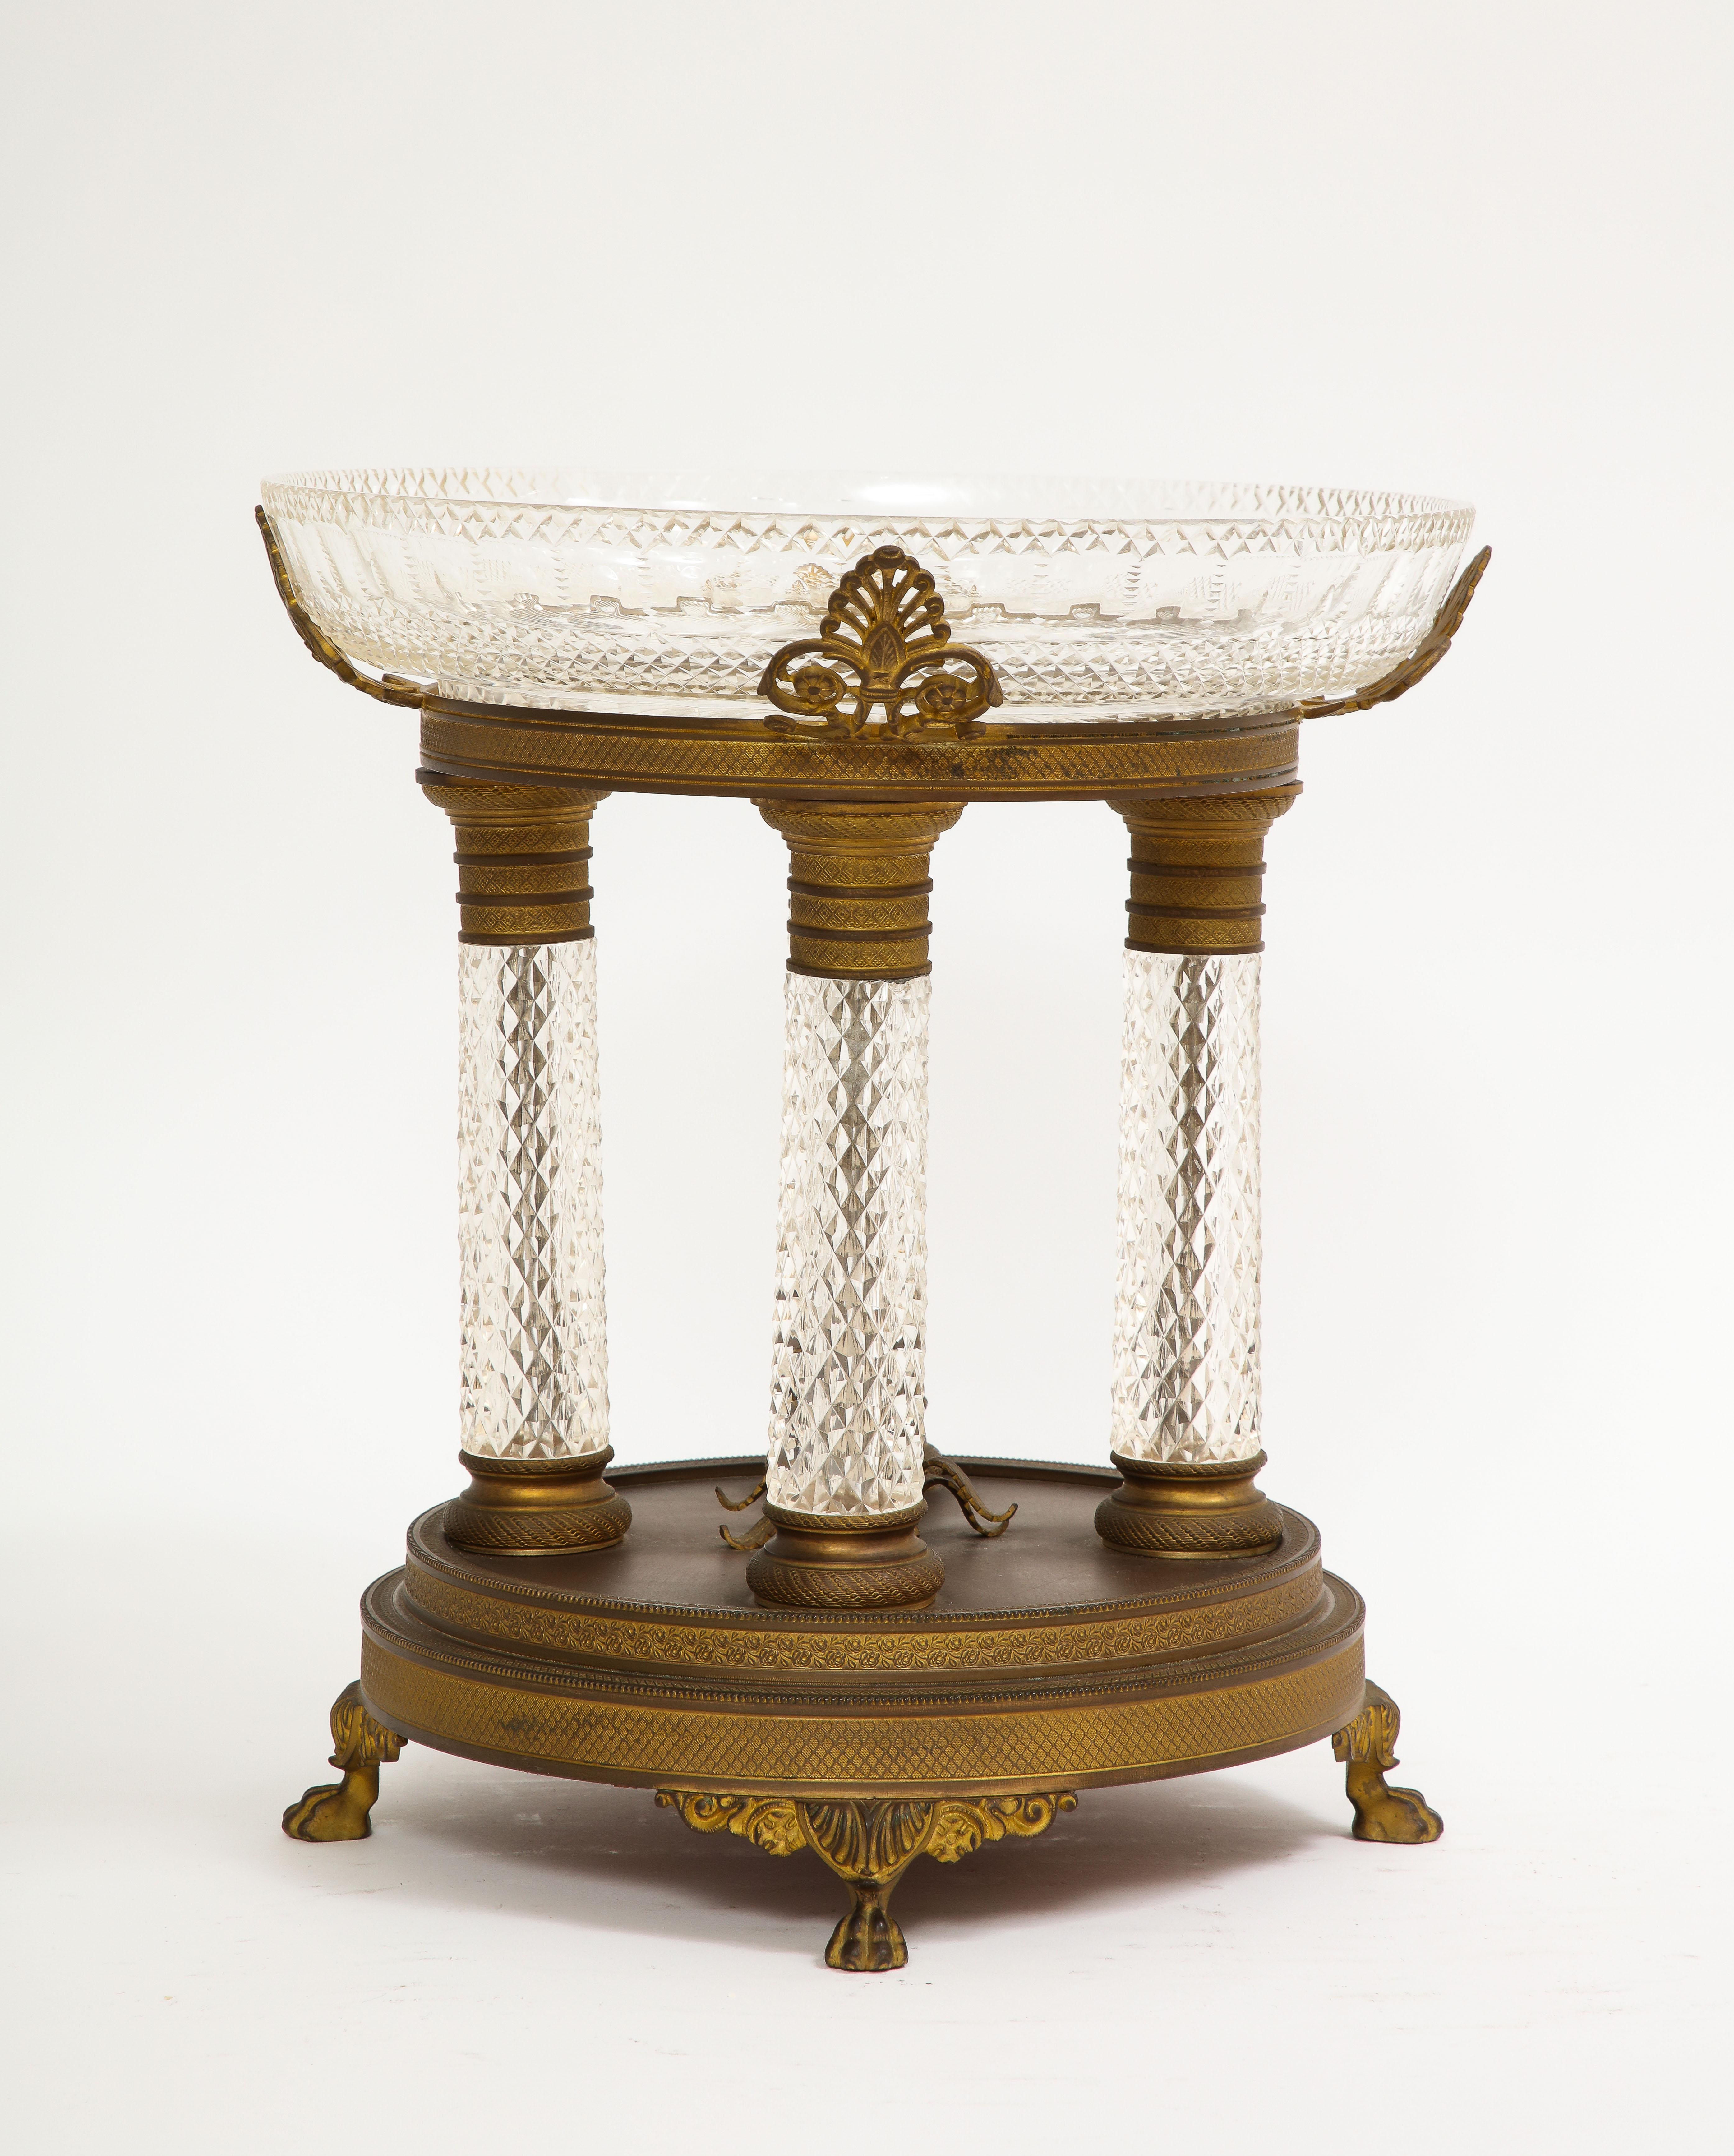 19th Century French Baccarat Ormolu Mounted Crystal Centerpiece For Sale 2